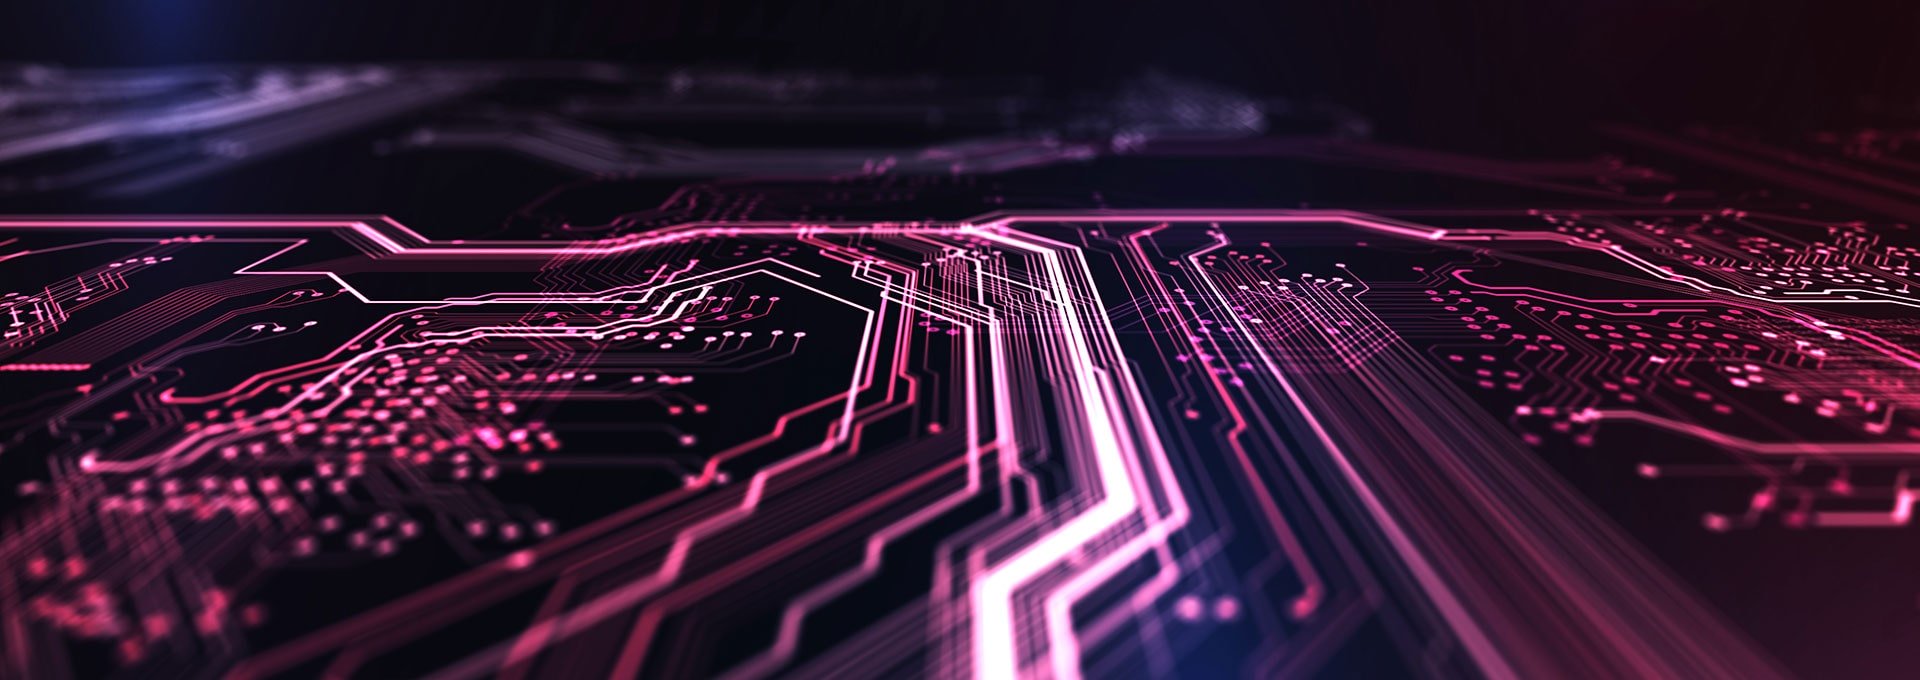 Dark red and blue technology background with circuit board, code, and a strong white line down the middle. A 3D illustration.